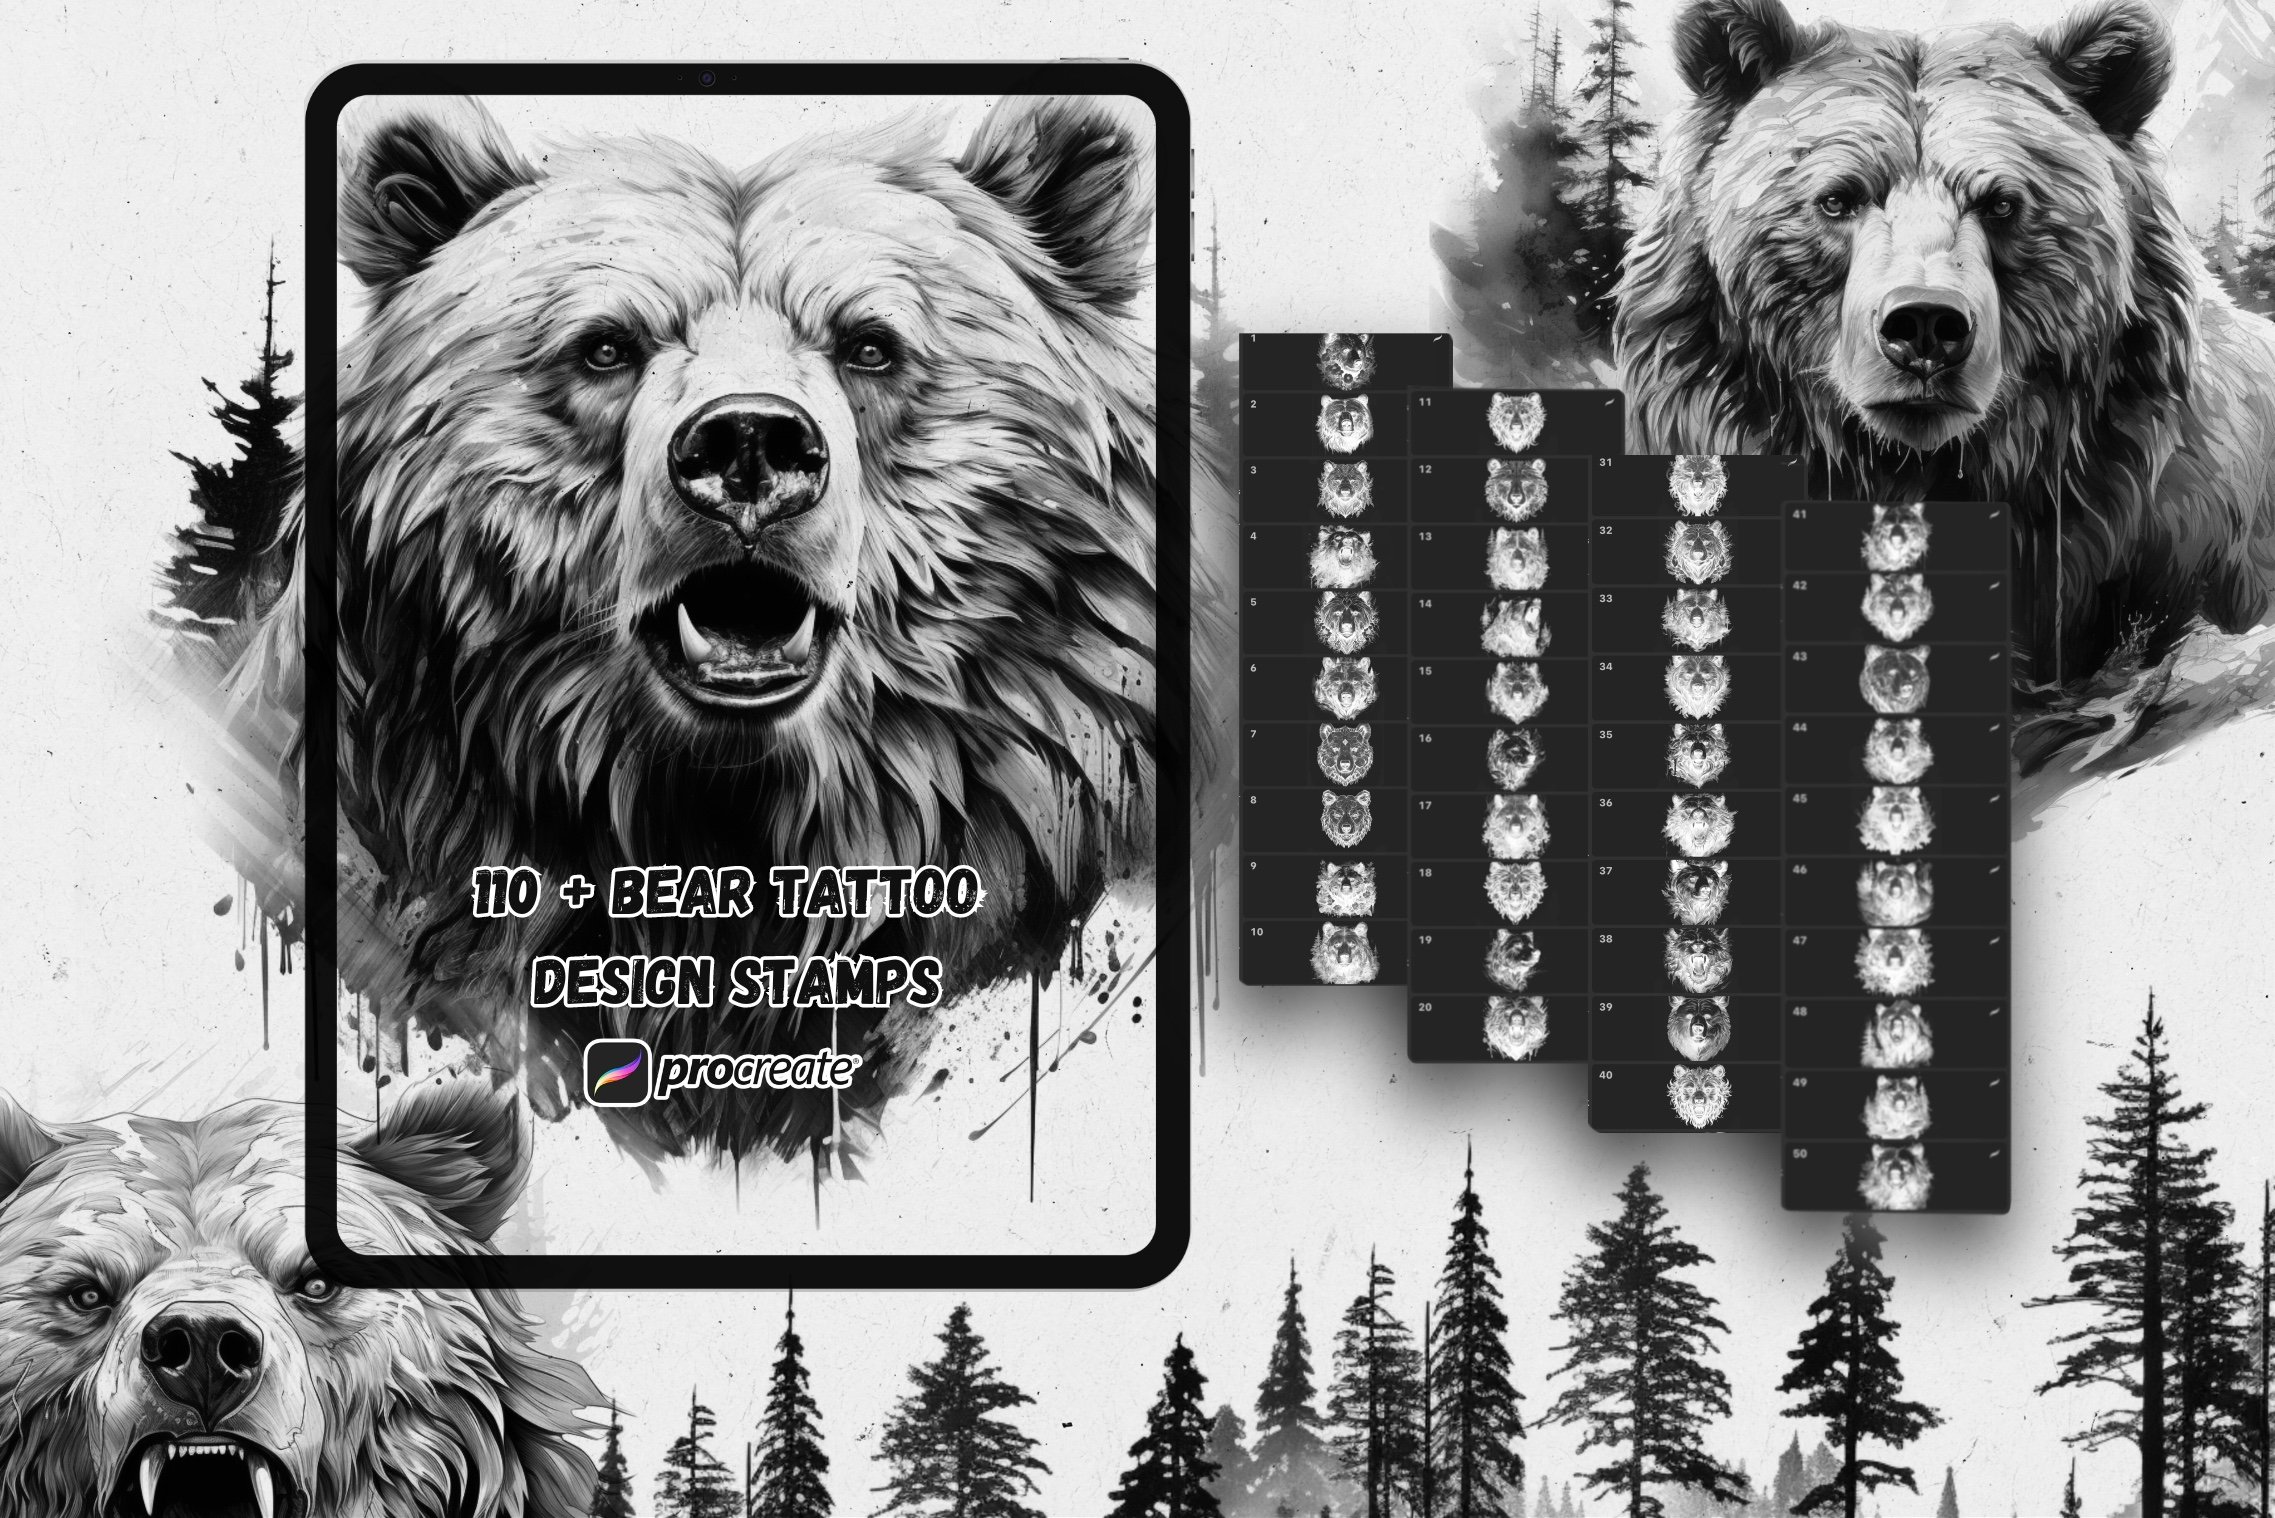 AI Art Generator: Arm tattoo of two grizzly bears fighting